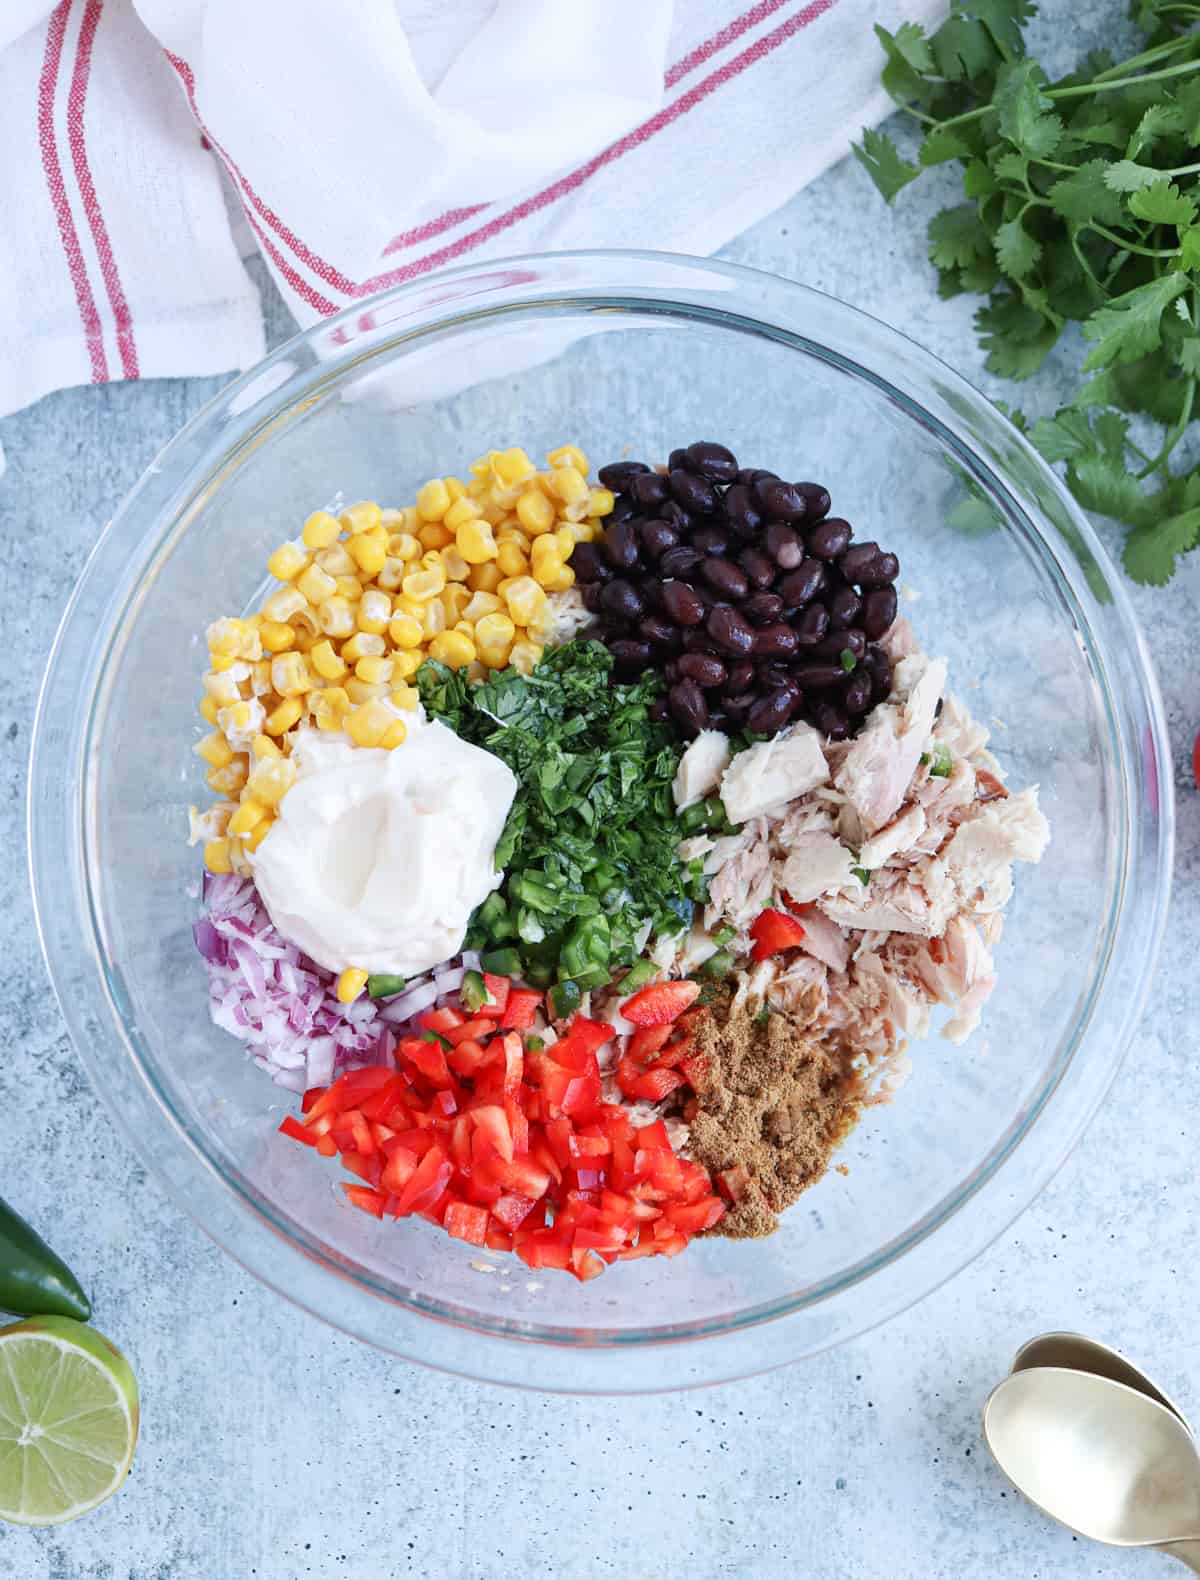 Mexican tuna salad before mixing in a glass bowl.